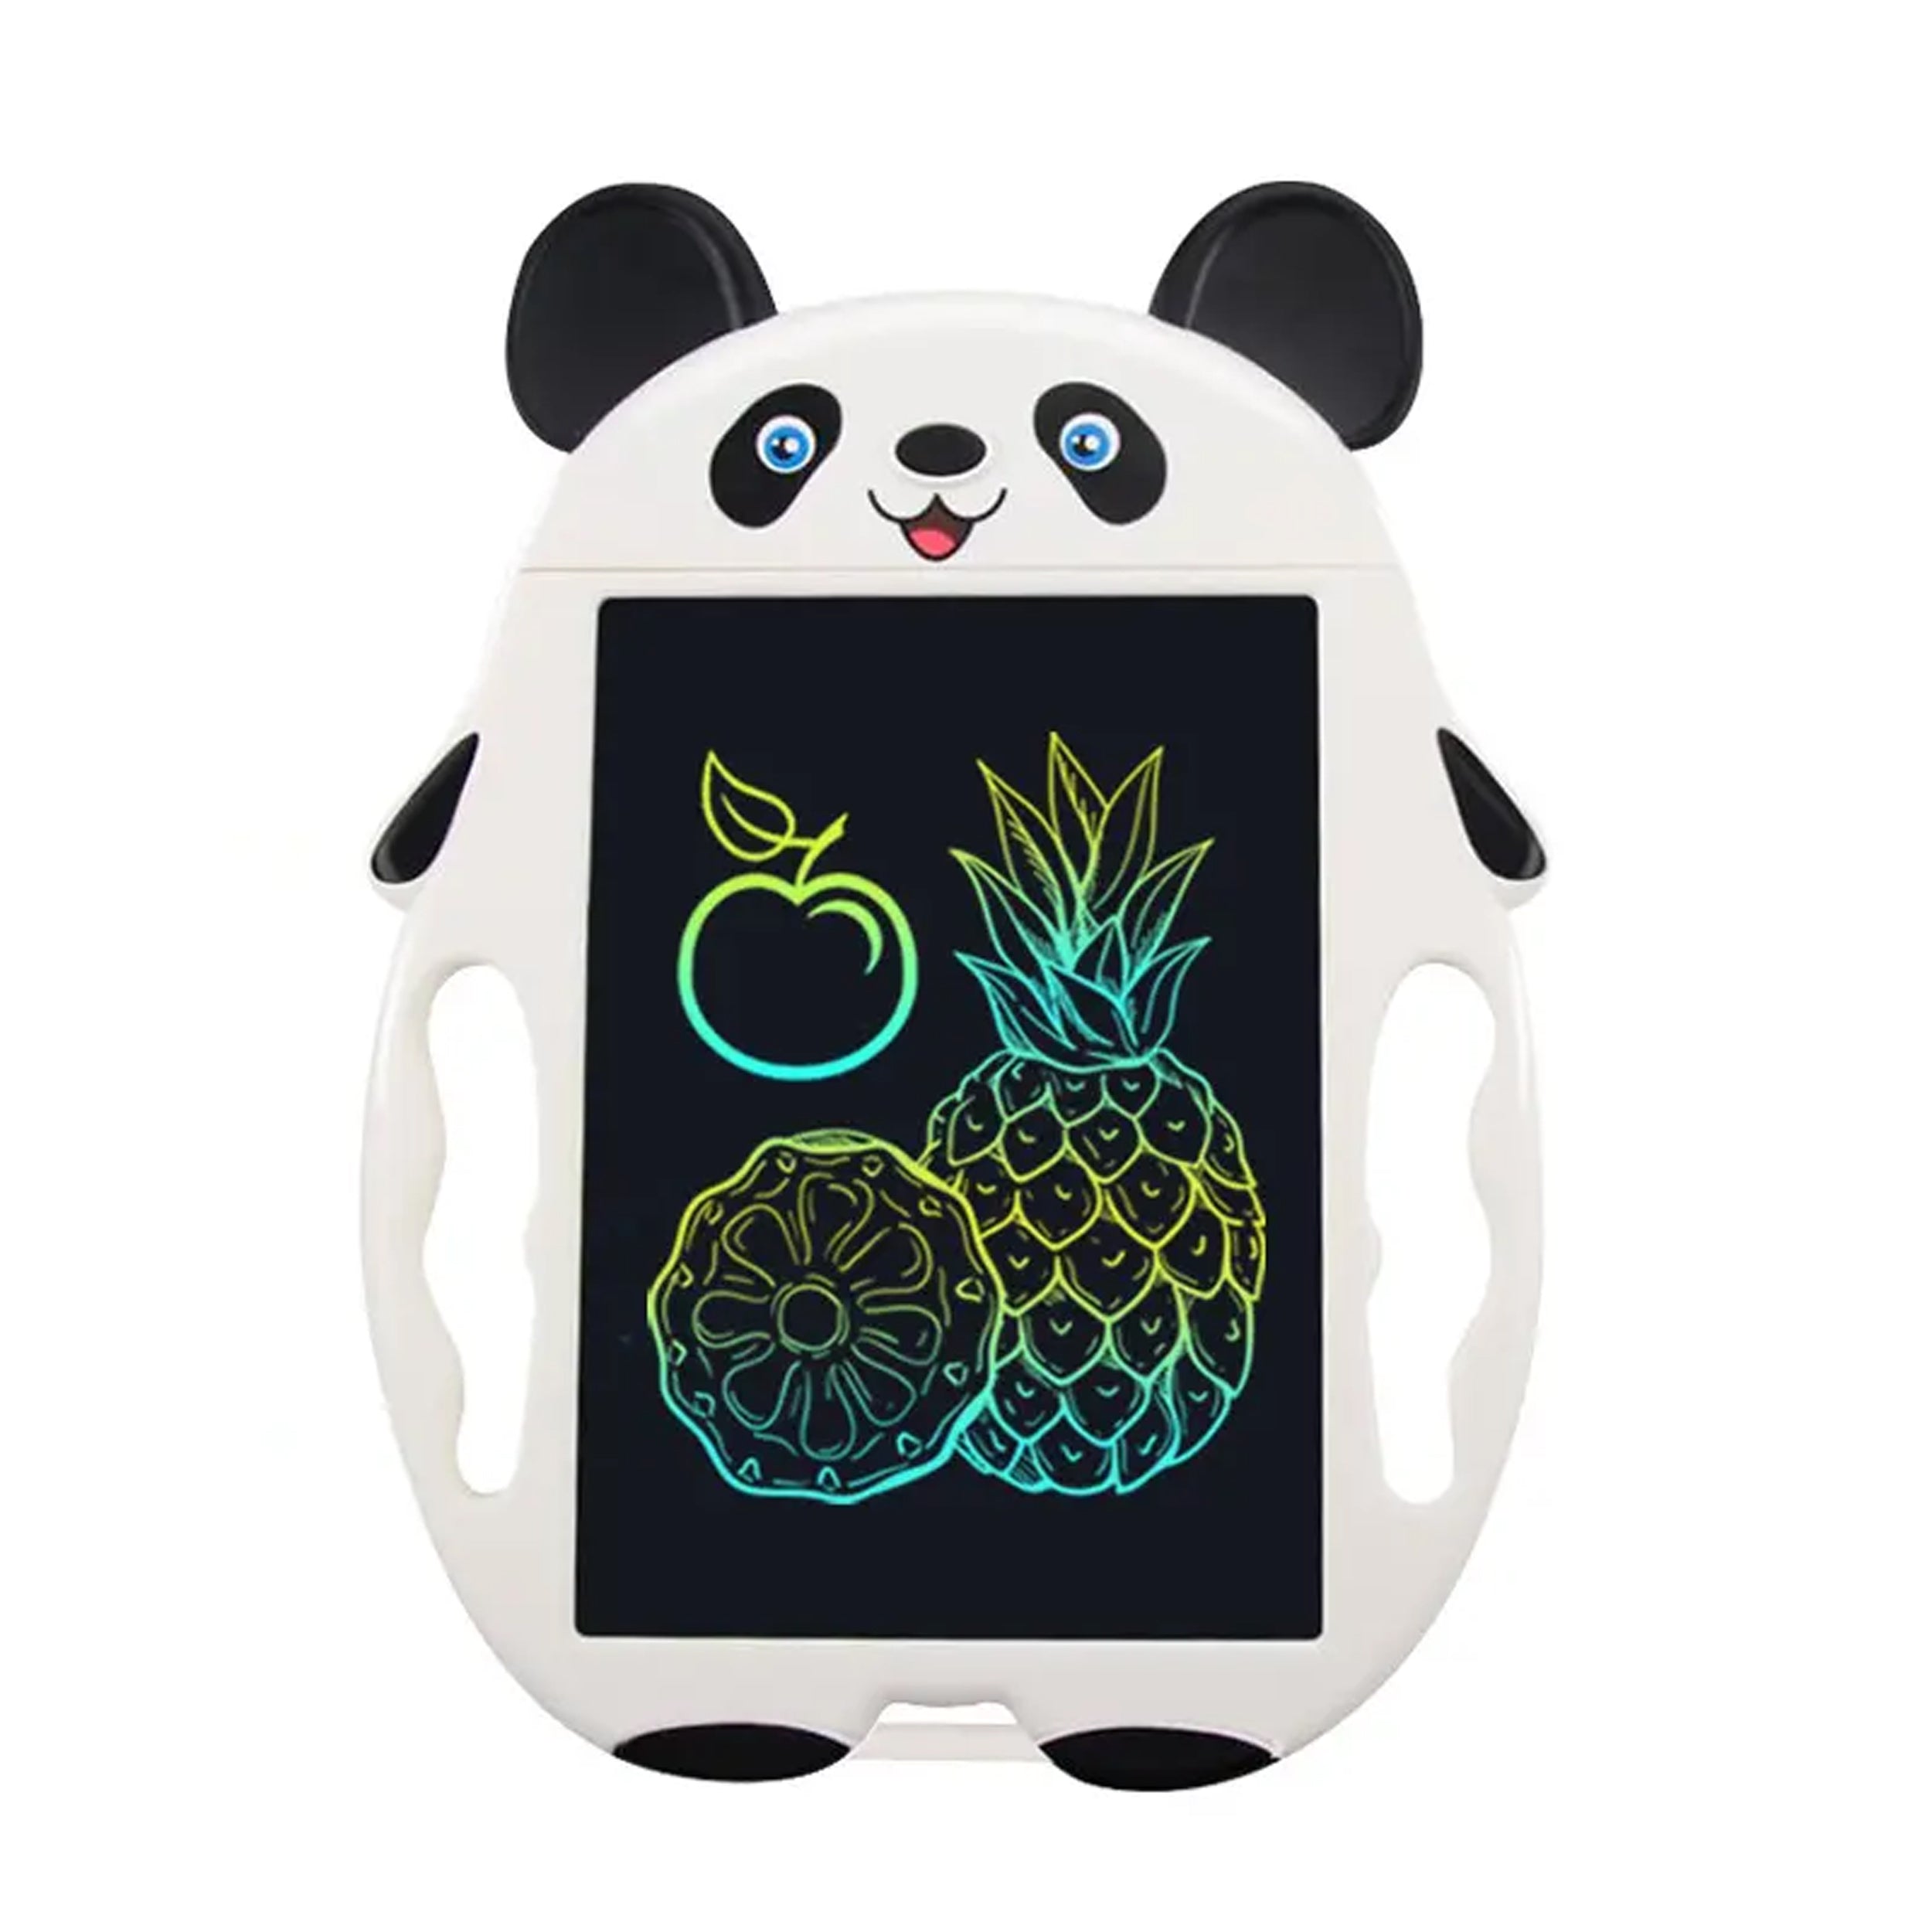 Get Creative with Panda Shaped 8.5" and 10" Inch Digital Electronic Drawing Boards Tablets